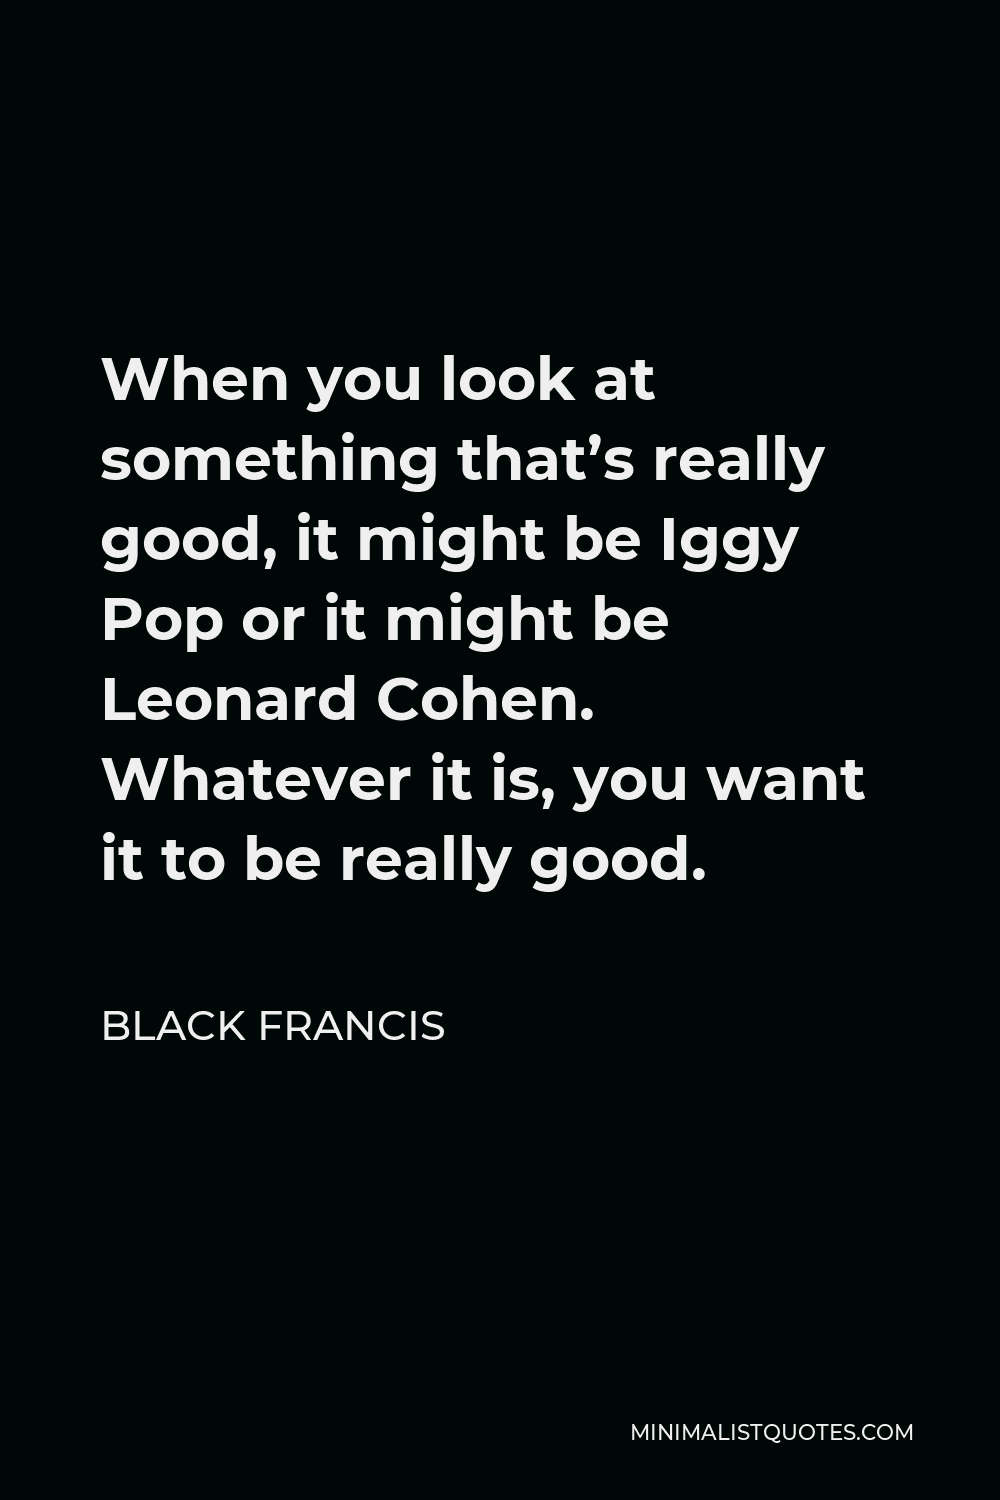 Black Francis Quote - When you look at something that’s really good, it might be Iggy Pop or it might be Leonard Cohen. Whatever it is, you want it to be really good.